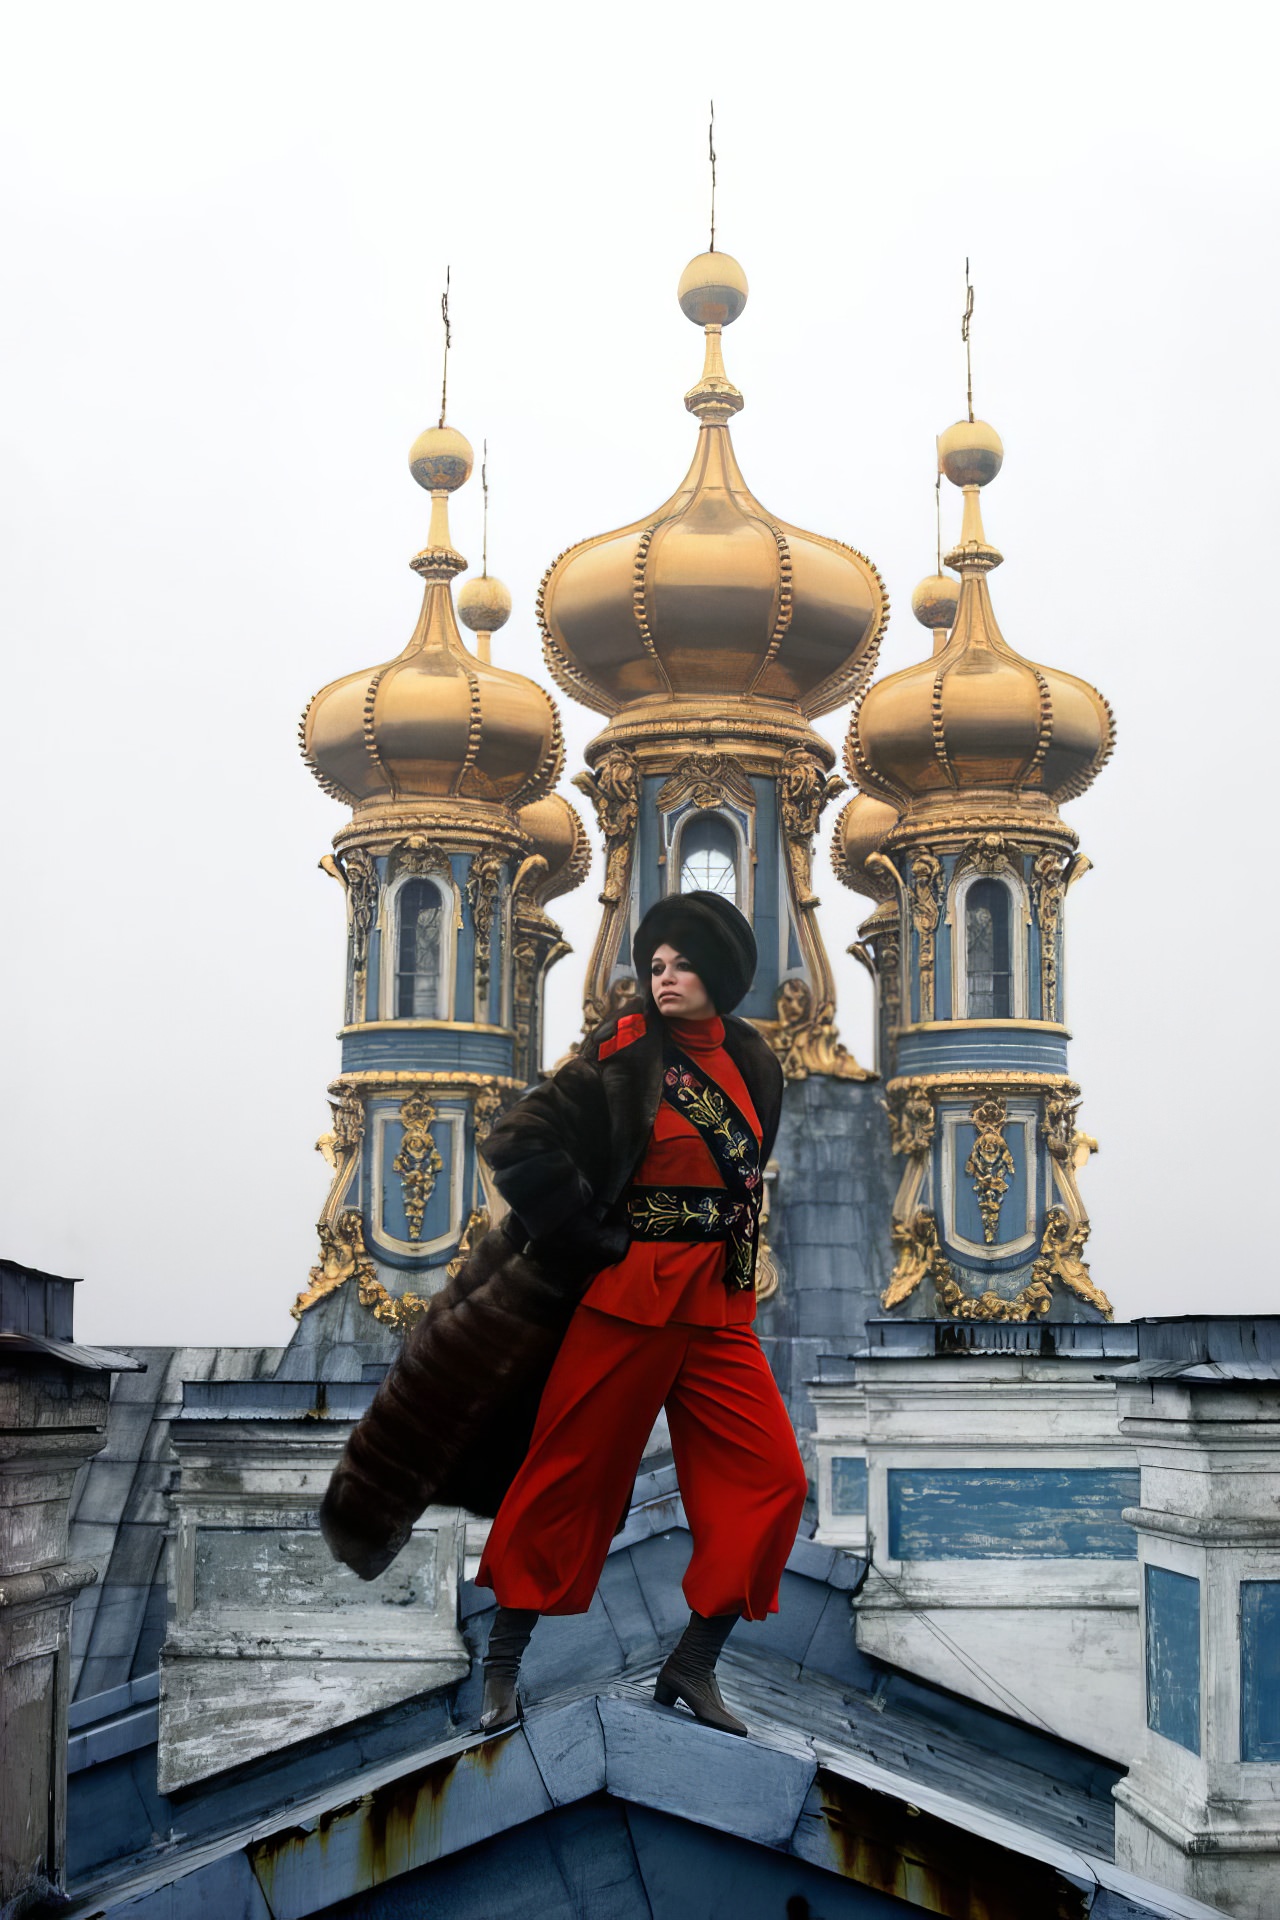 Ann Turkel on the domes of the Catherine Palace in Pushkin, 1967.